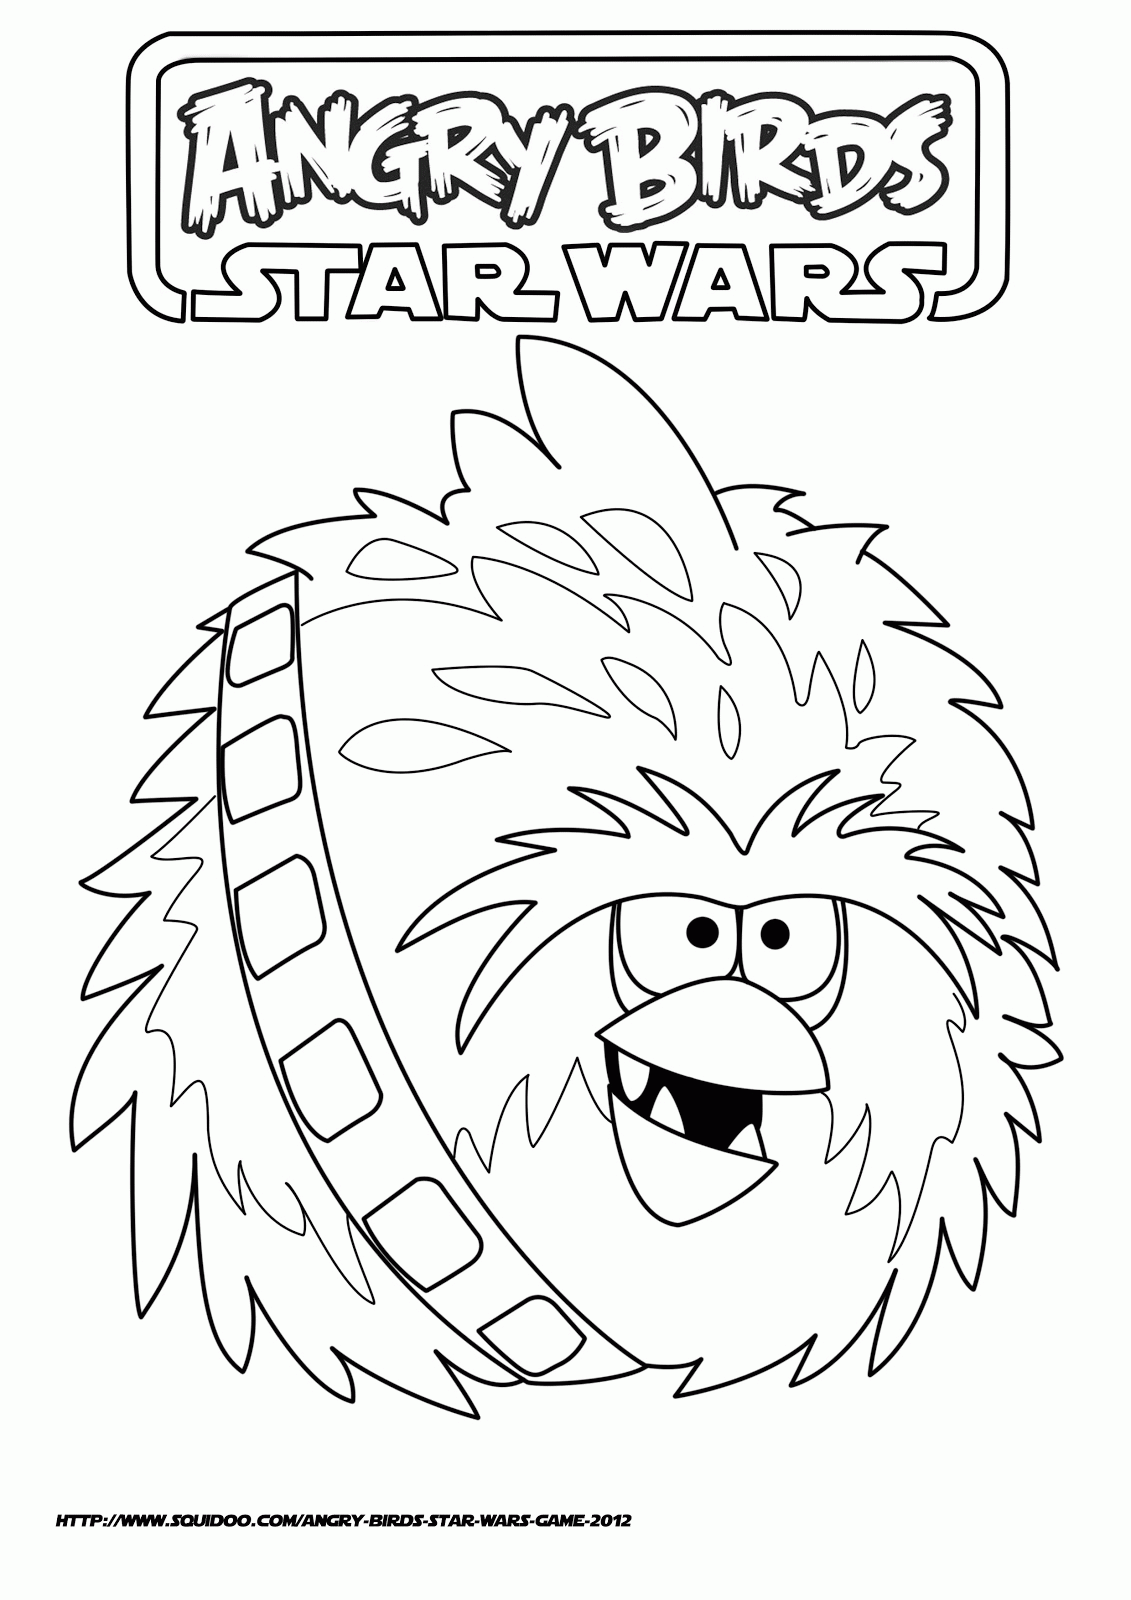 Angry Birds Star Wars Coloring Book - Coloring Pages for Kids and ...